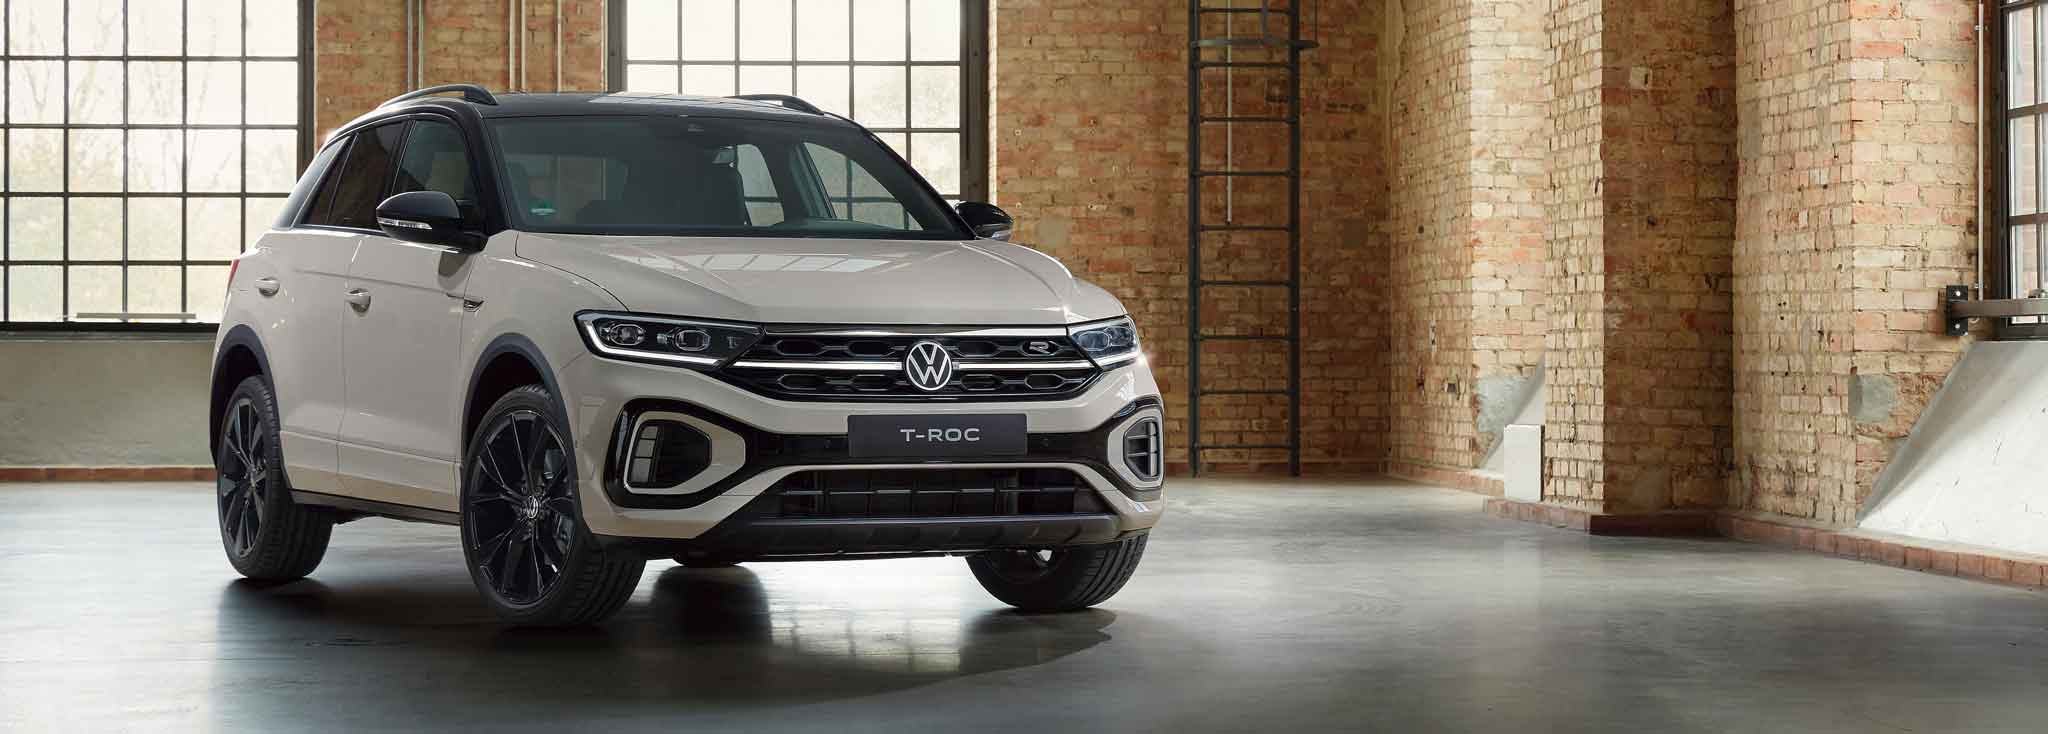 Space for one more: Volkswagen T-Roc